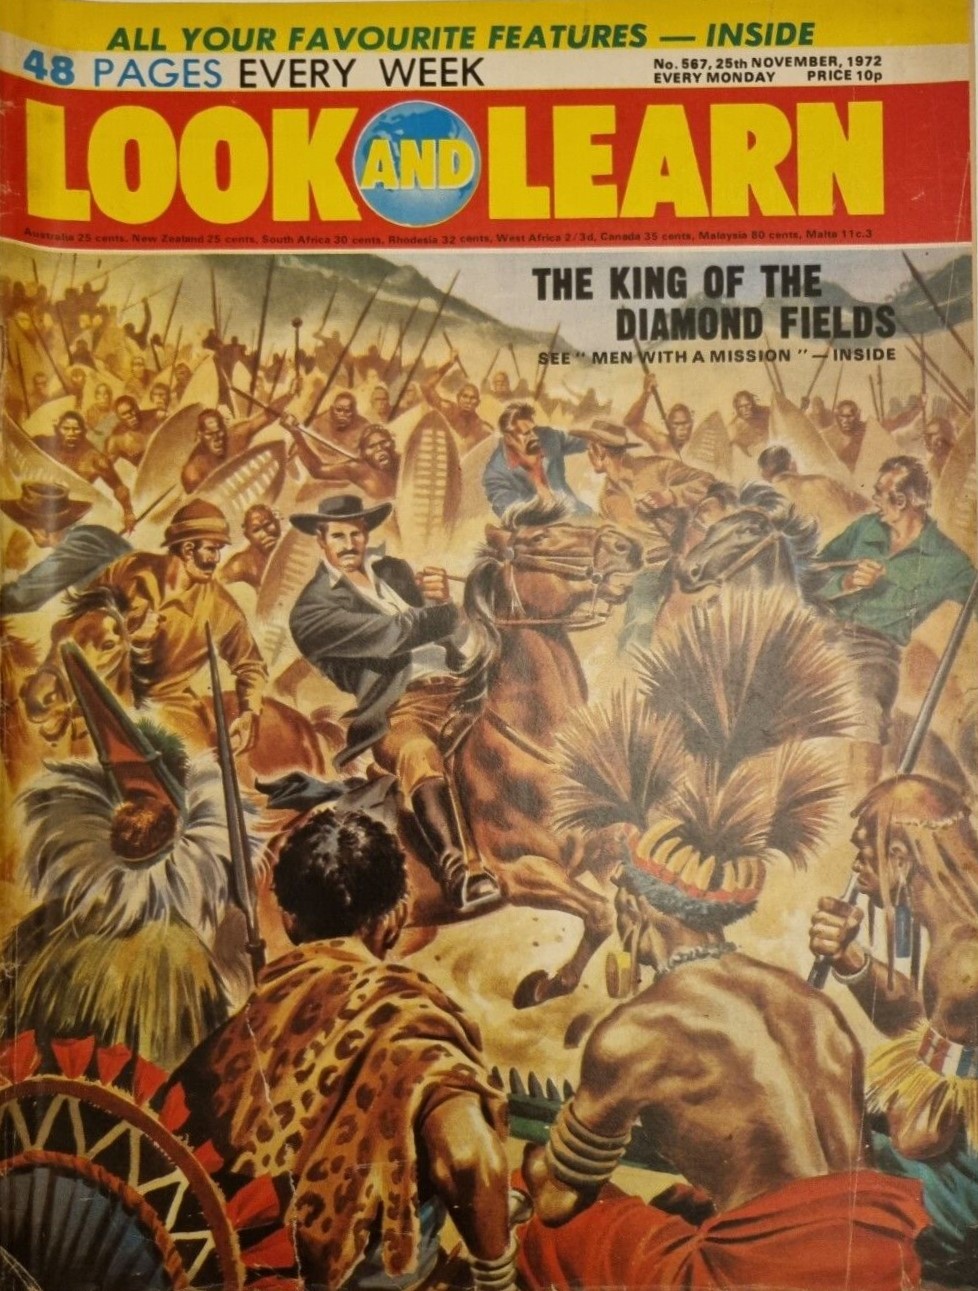 Look and Learn Magazine No. 567, 25th Nov. 1972 The King Of The Diamond Fields